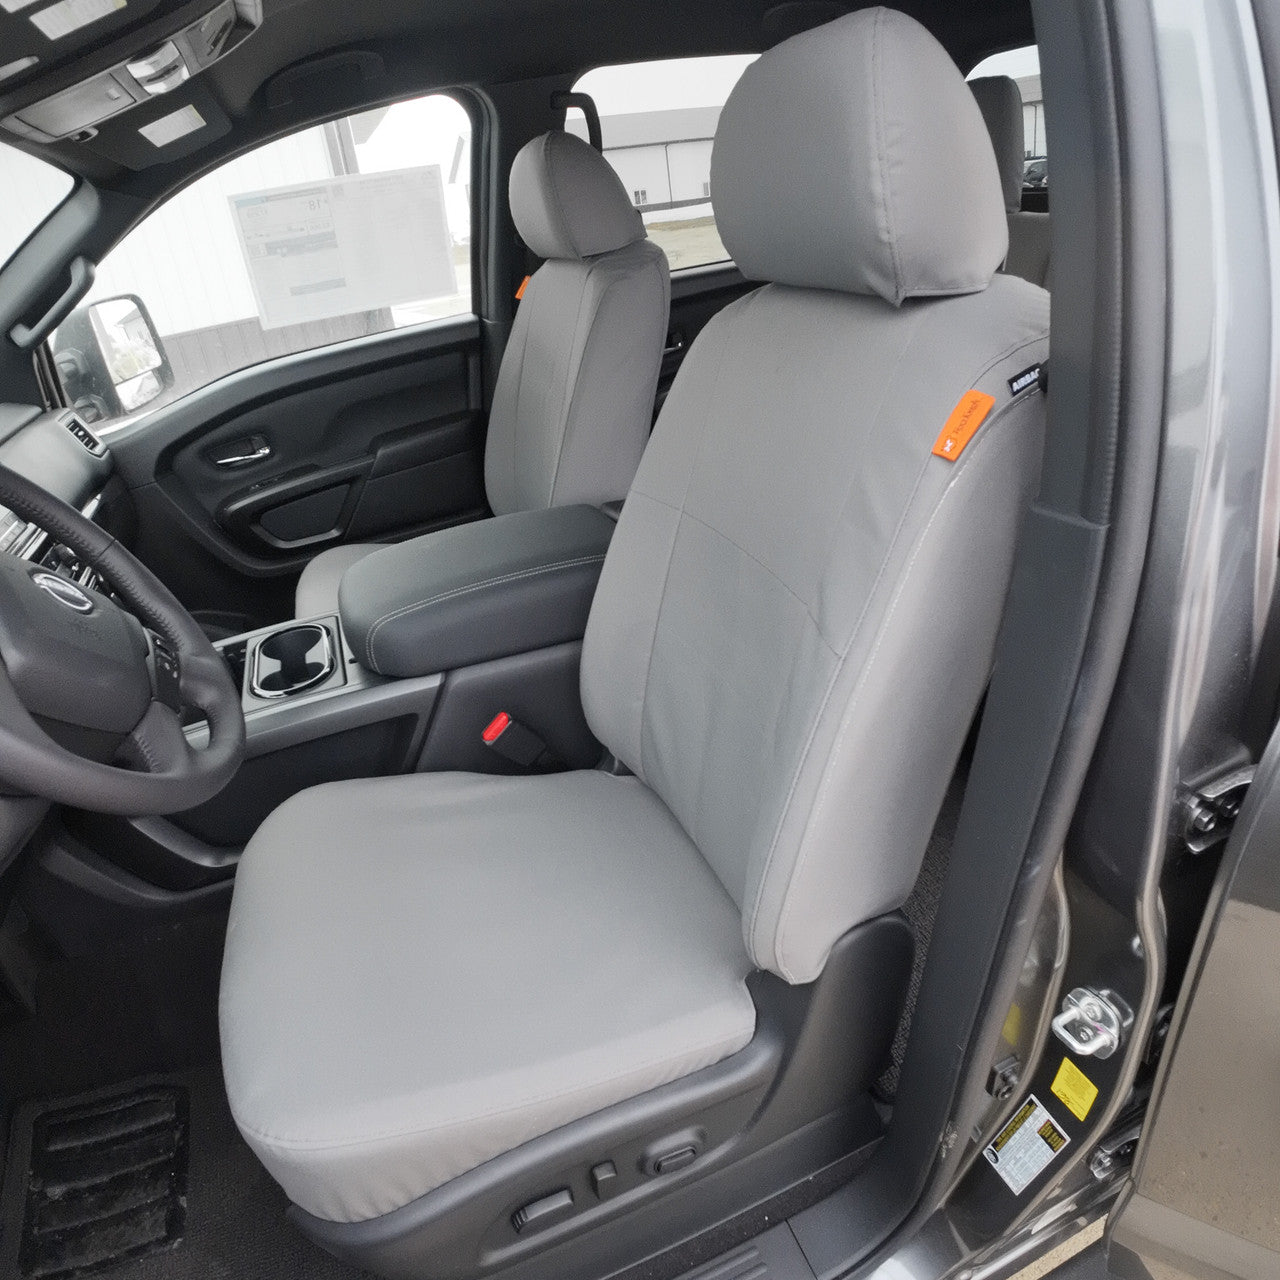 TigerTough Nissan Titan Heavy Duty Front Seat Covers. You're going to love them.